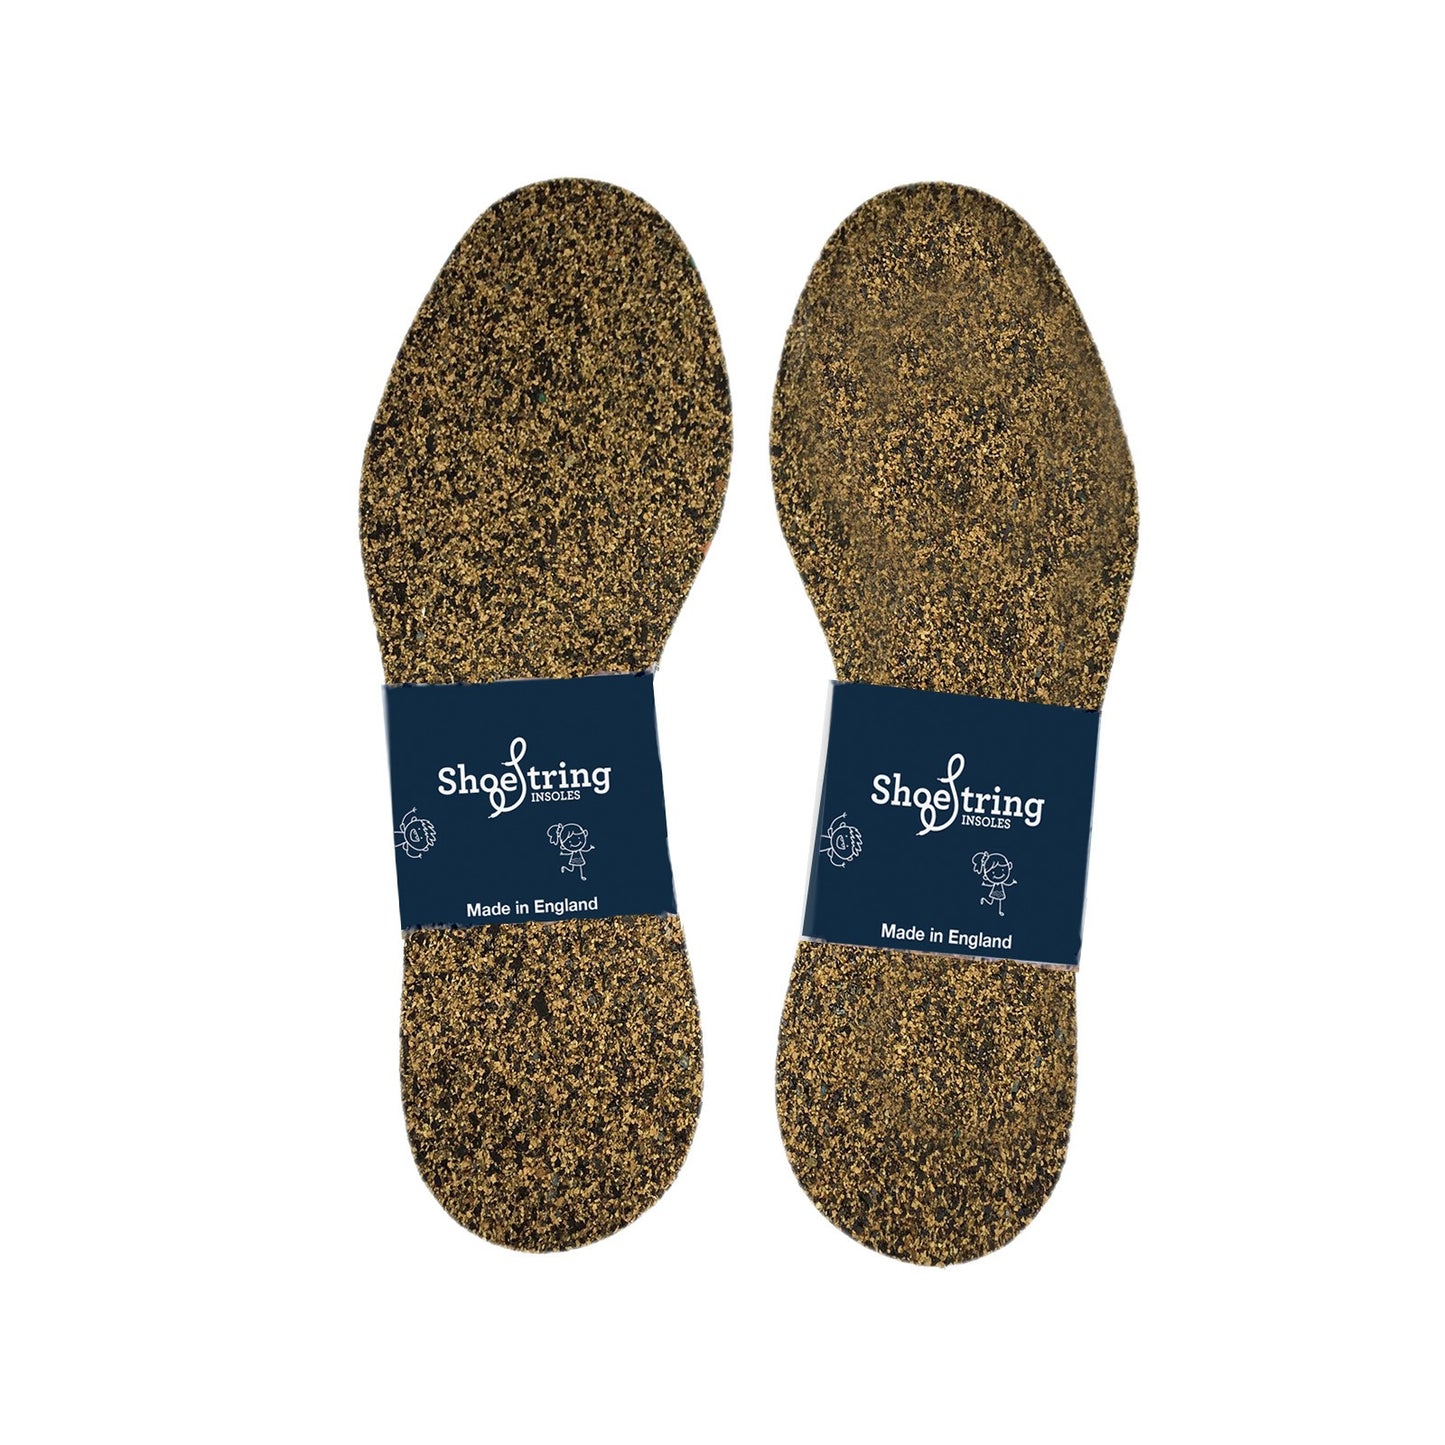 Cork insoles by Shoestring. Above view.